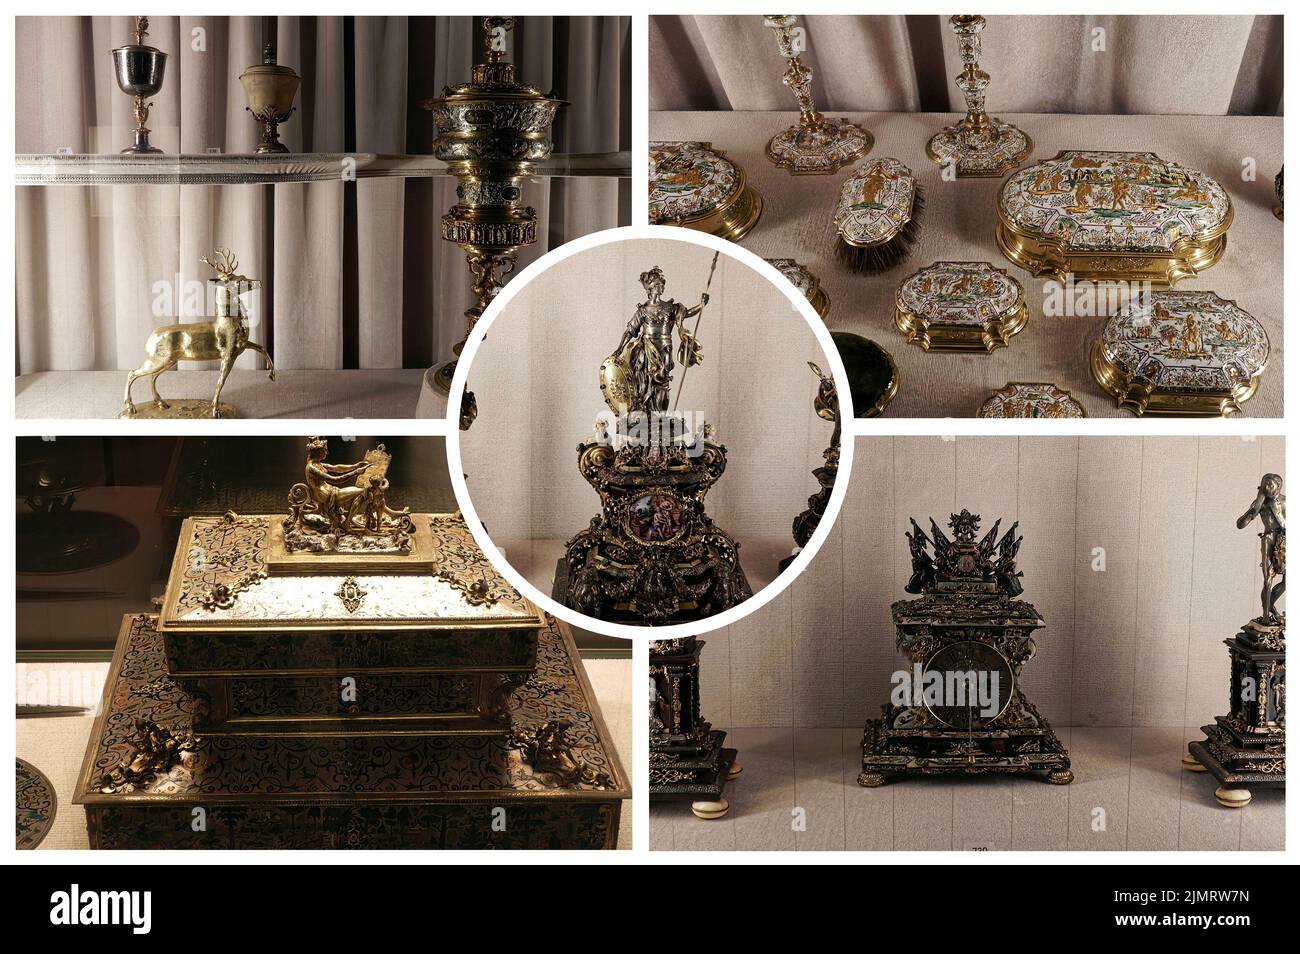 The Treasures of the Bavarian Kings in the residence of the Bavarian Kingdom in Munich. Stock Photo